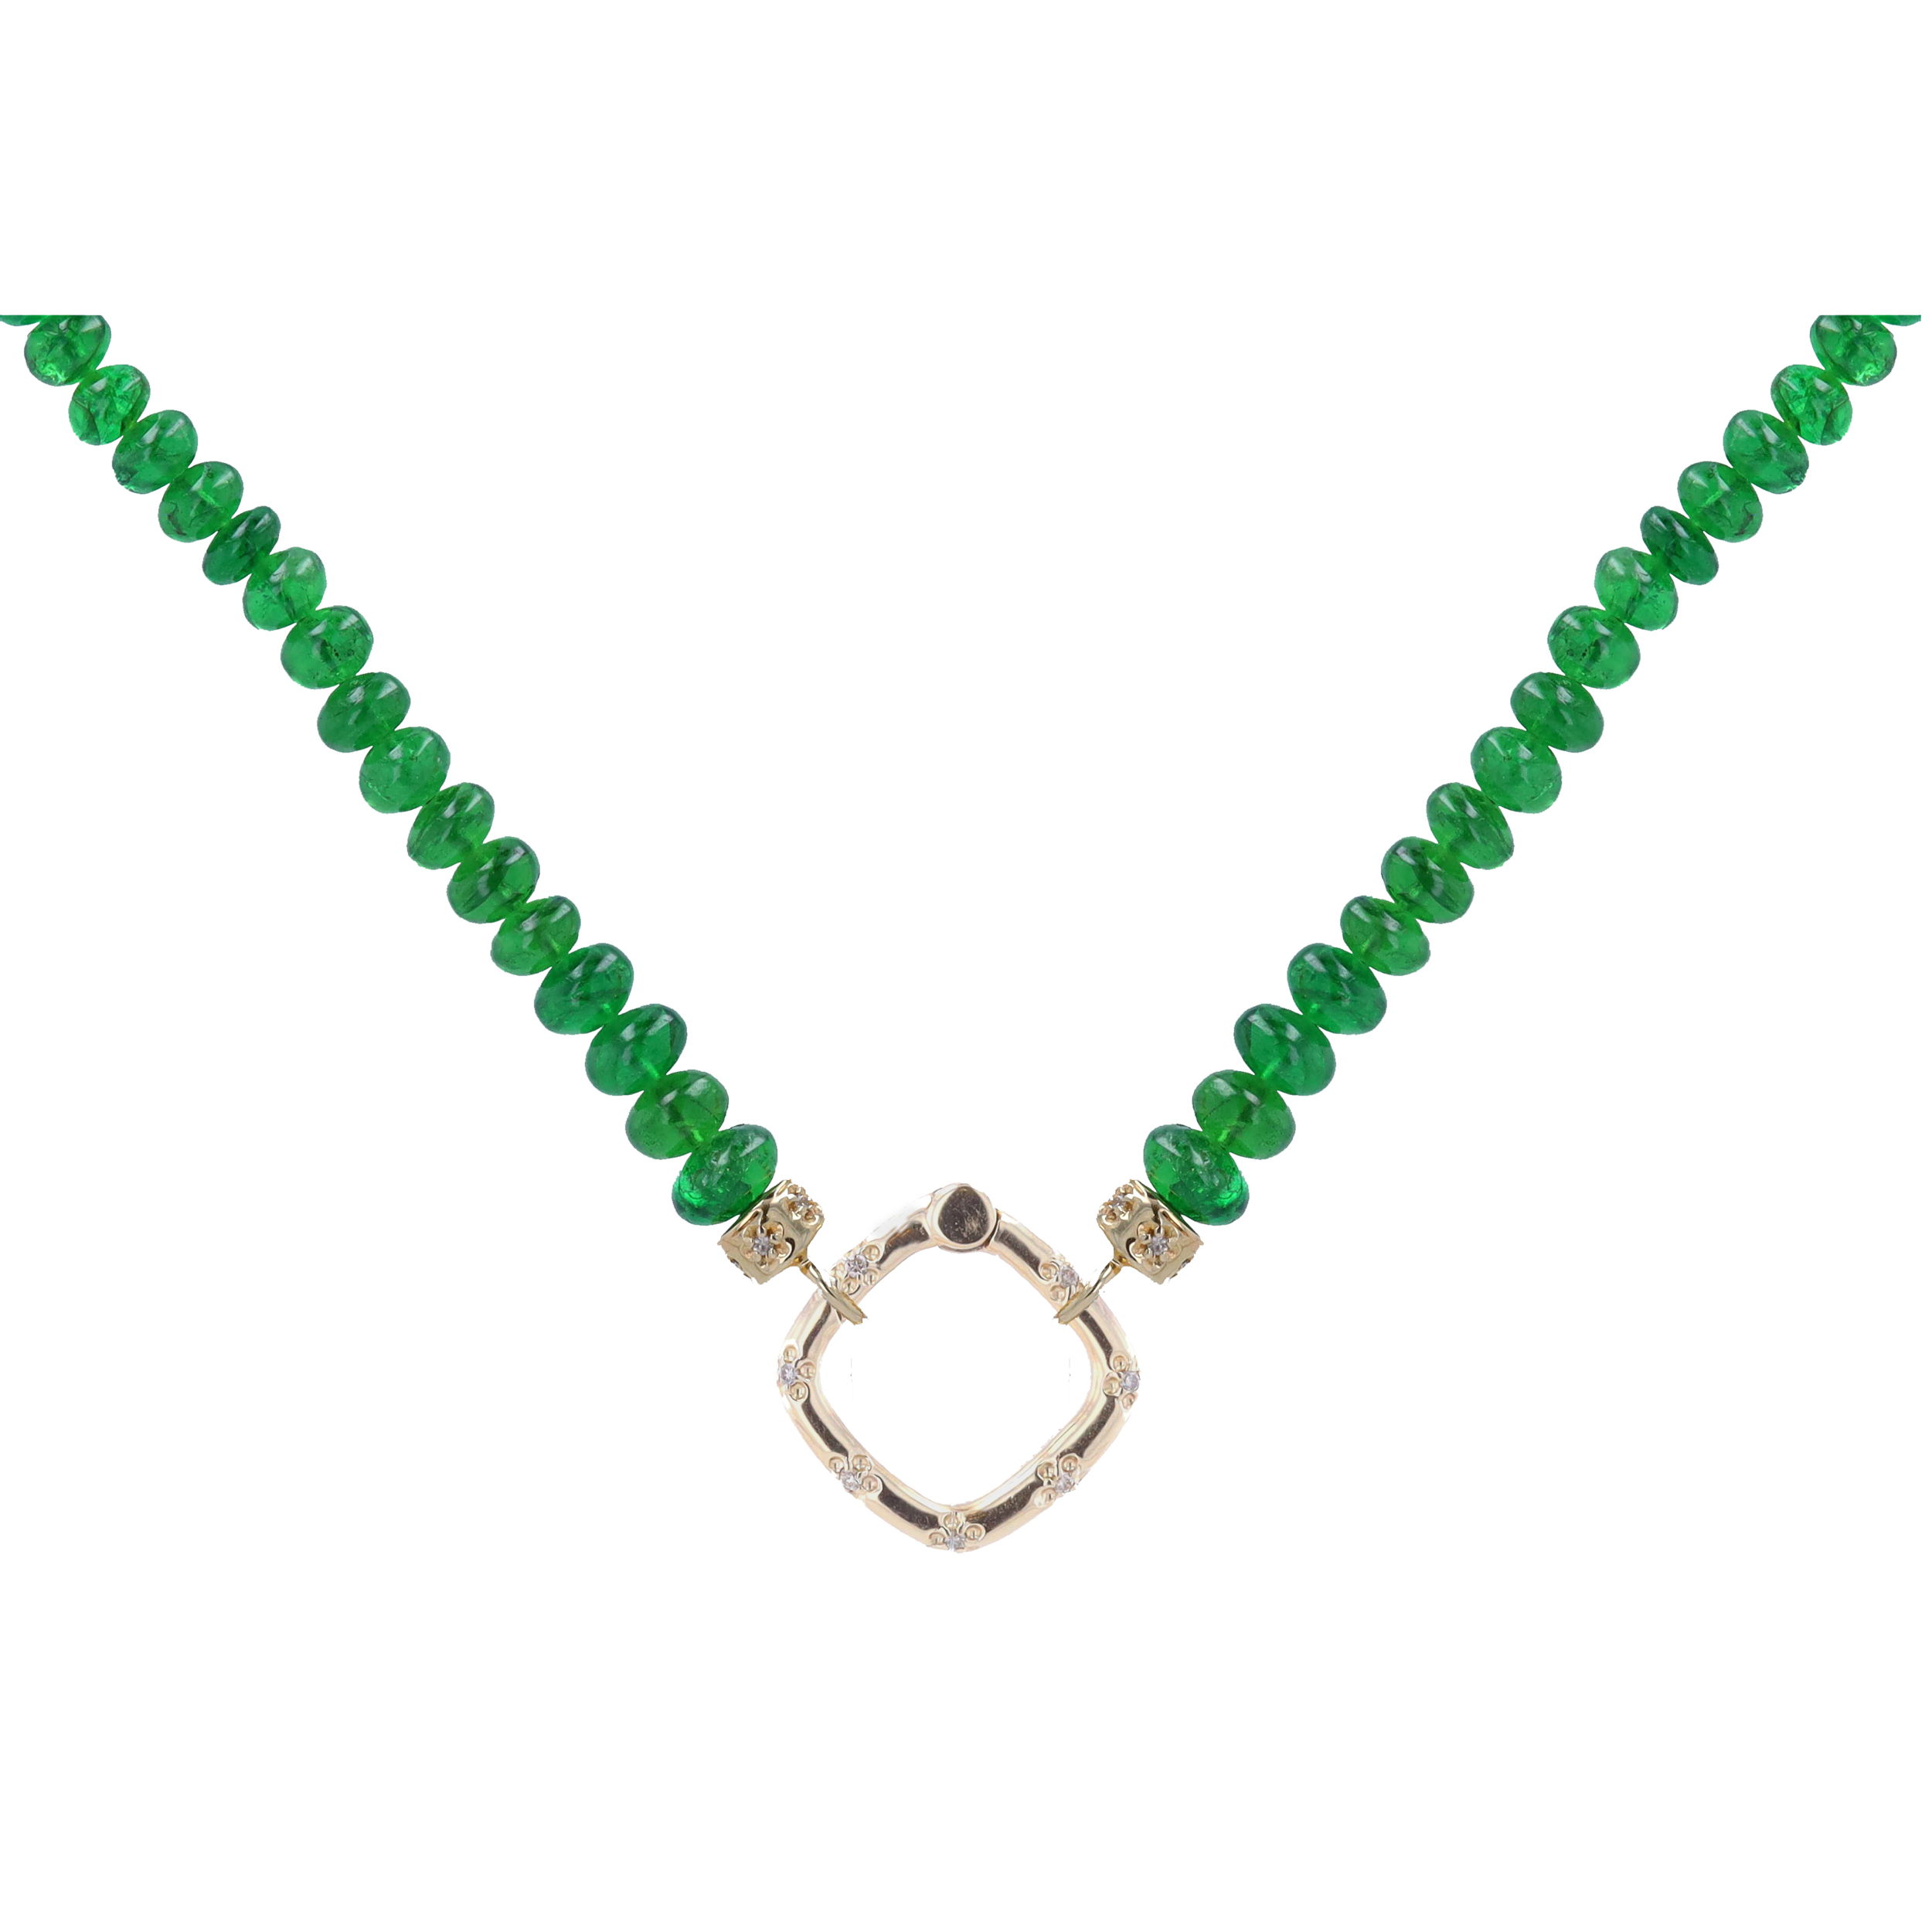 22" ~5mm Hand Polished Translucent Emerald Beaded Chain With 14k Gold Extension, and end Caps with Square